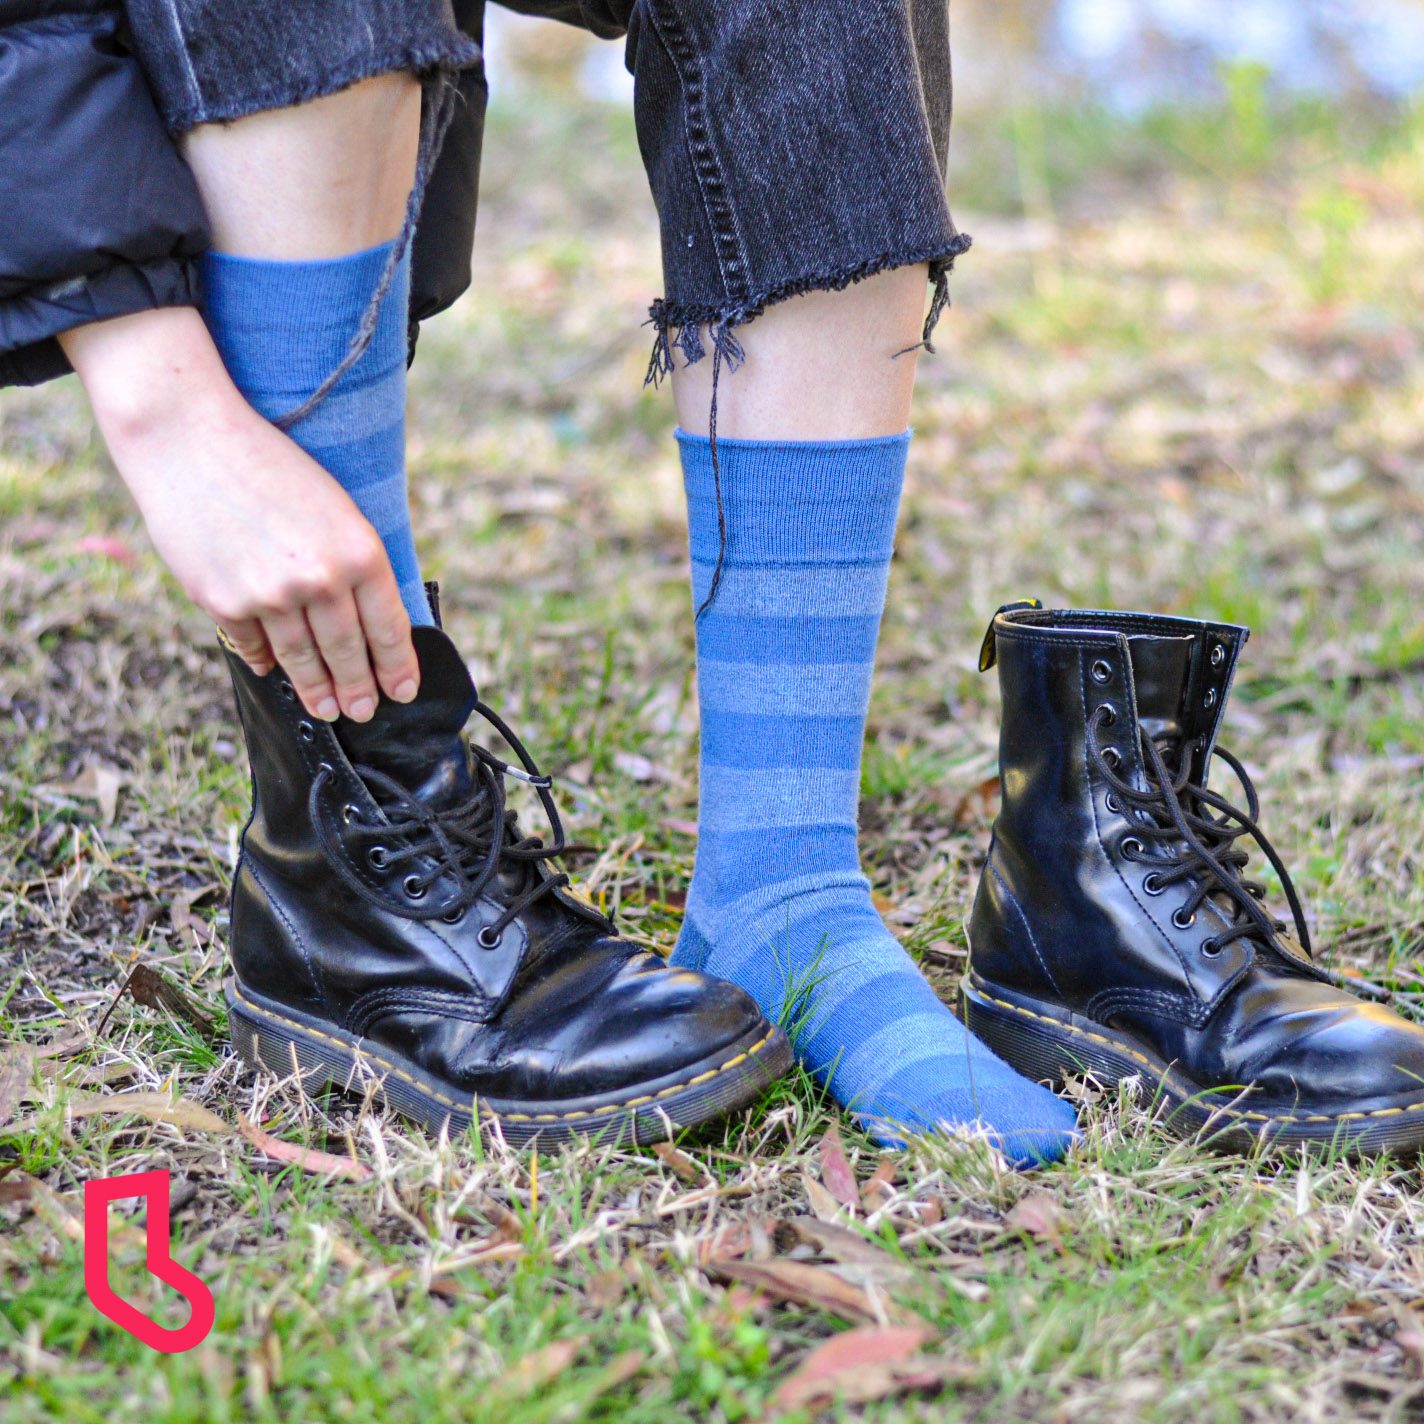 3 Ways Investing in Quality Socks Will Save You Money